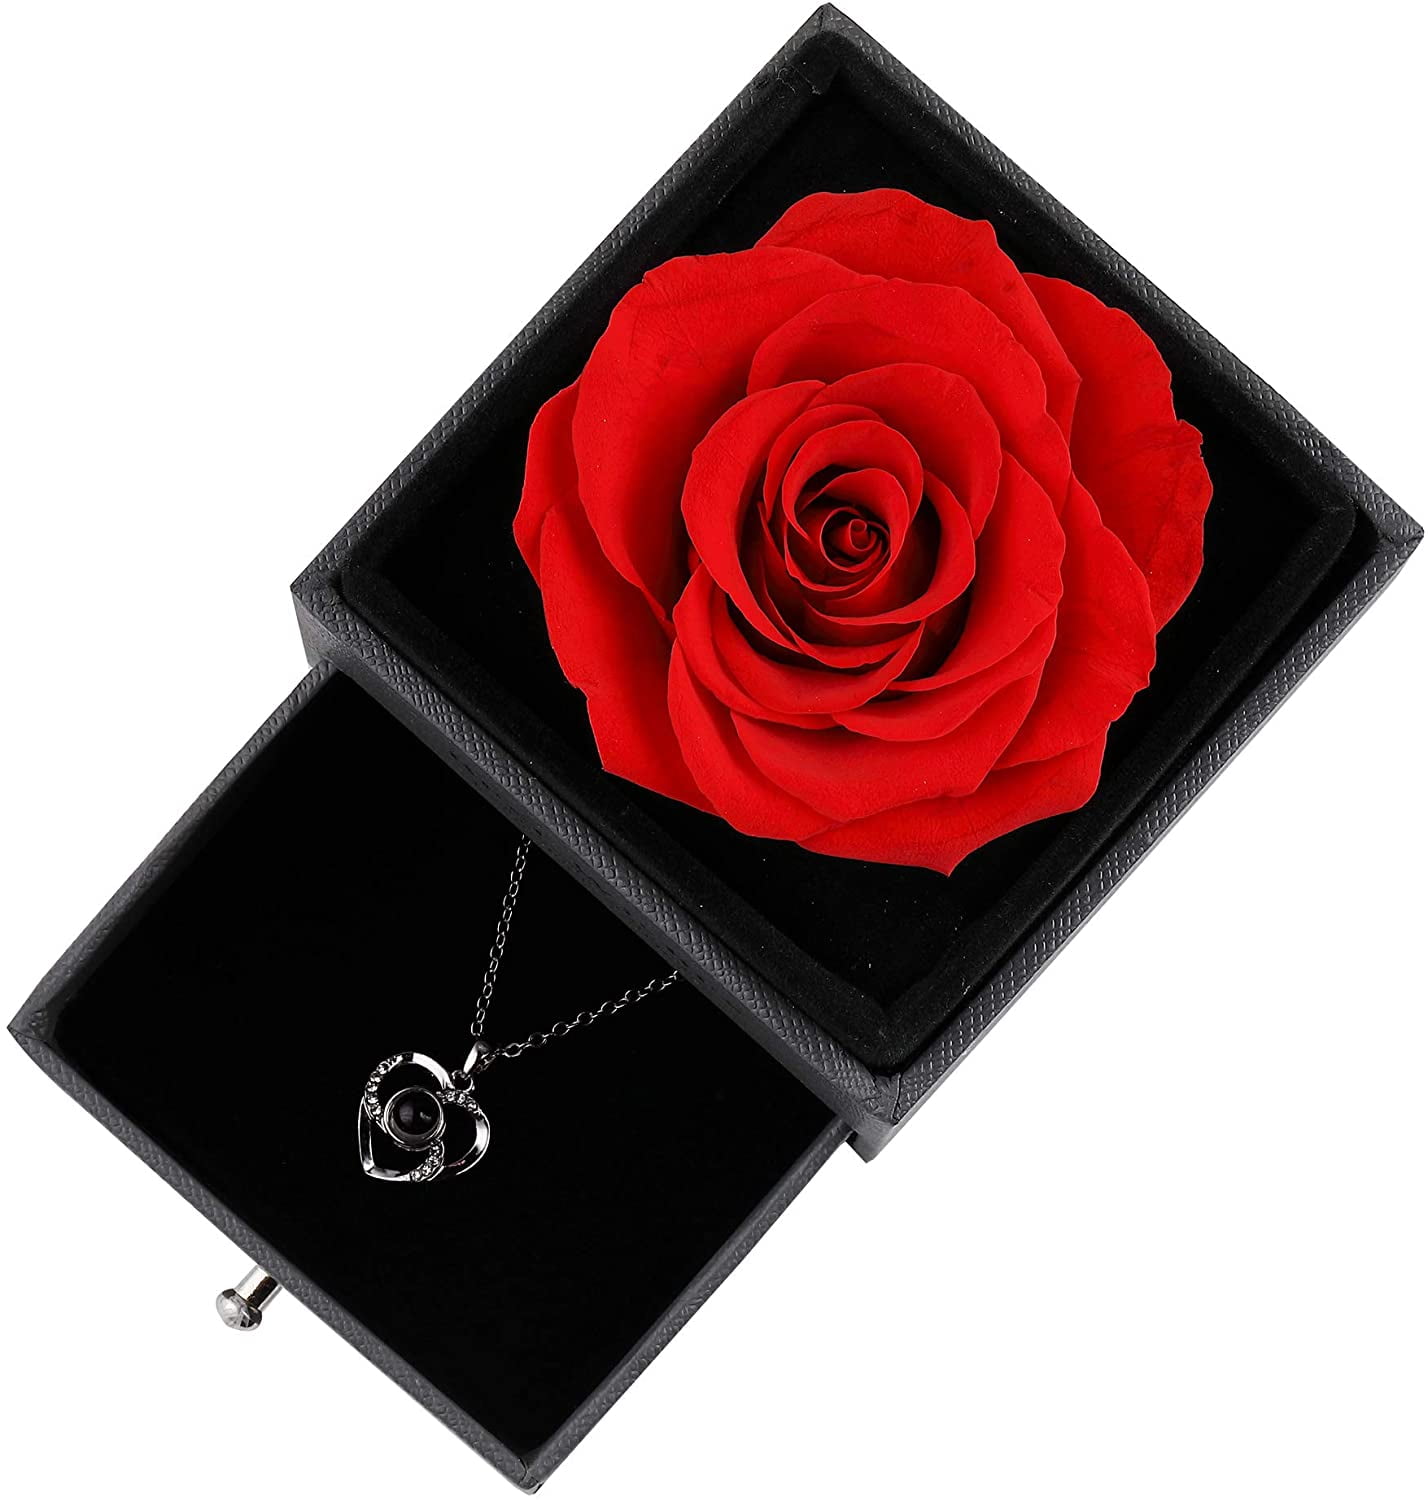 Iloveyou Necklace Blue Preserved Real Rose with Necklace Eternal Rose Flower Jewelry Box Never Withered Flower Romantic Gifts for Her Valentine's Day,Mother's Day,Birthday,Christmas